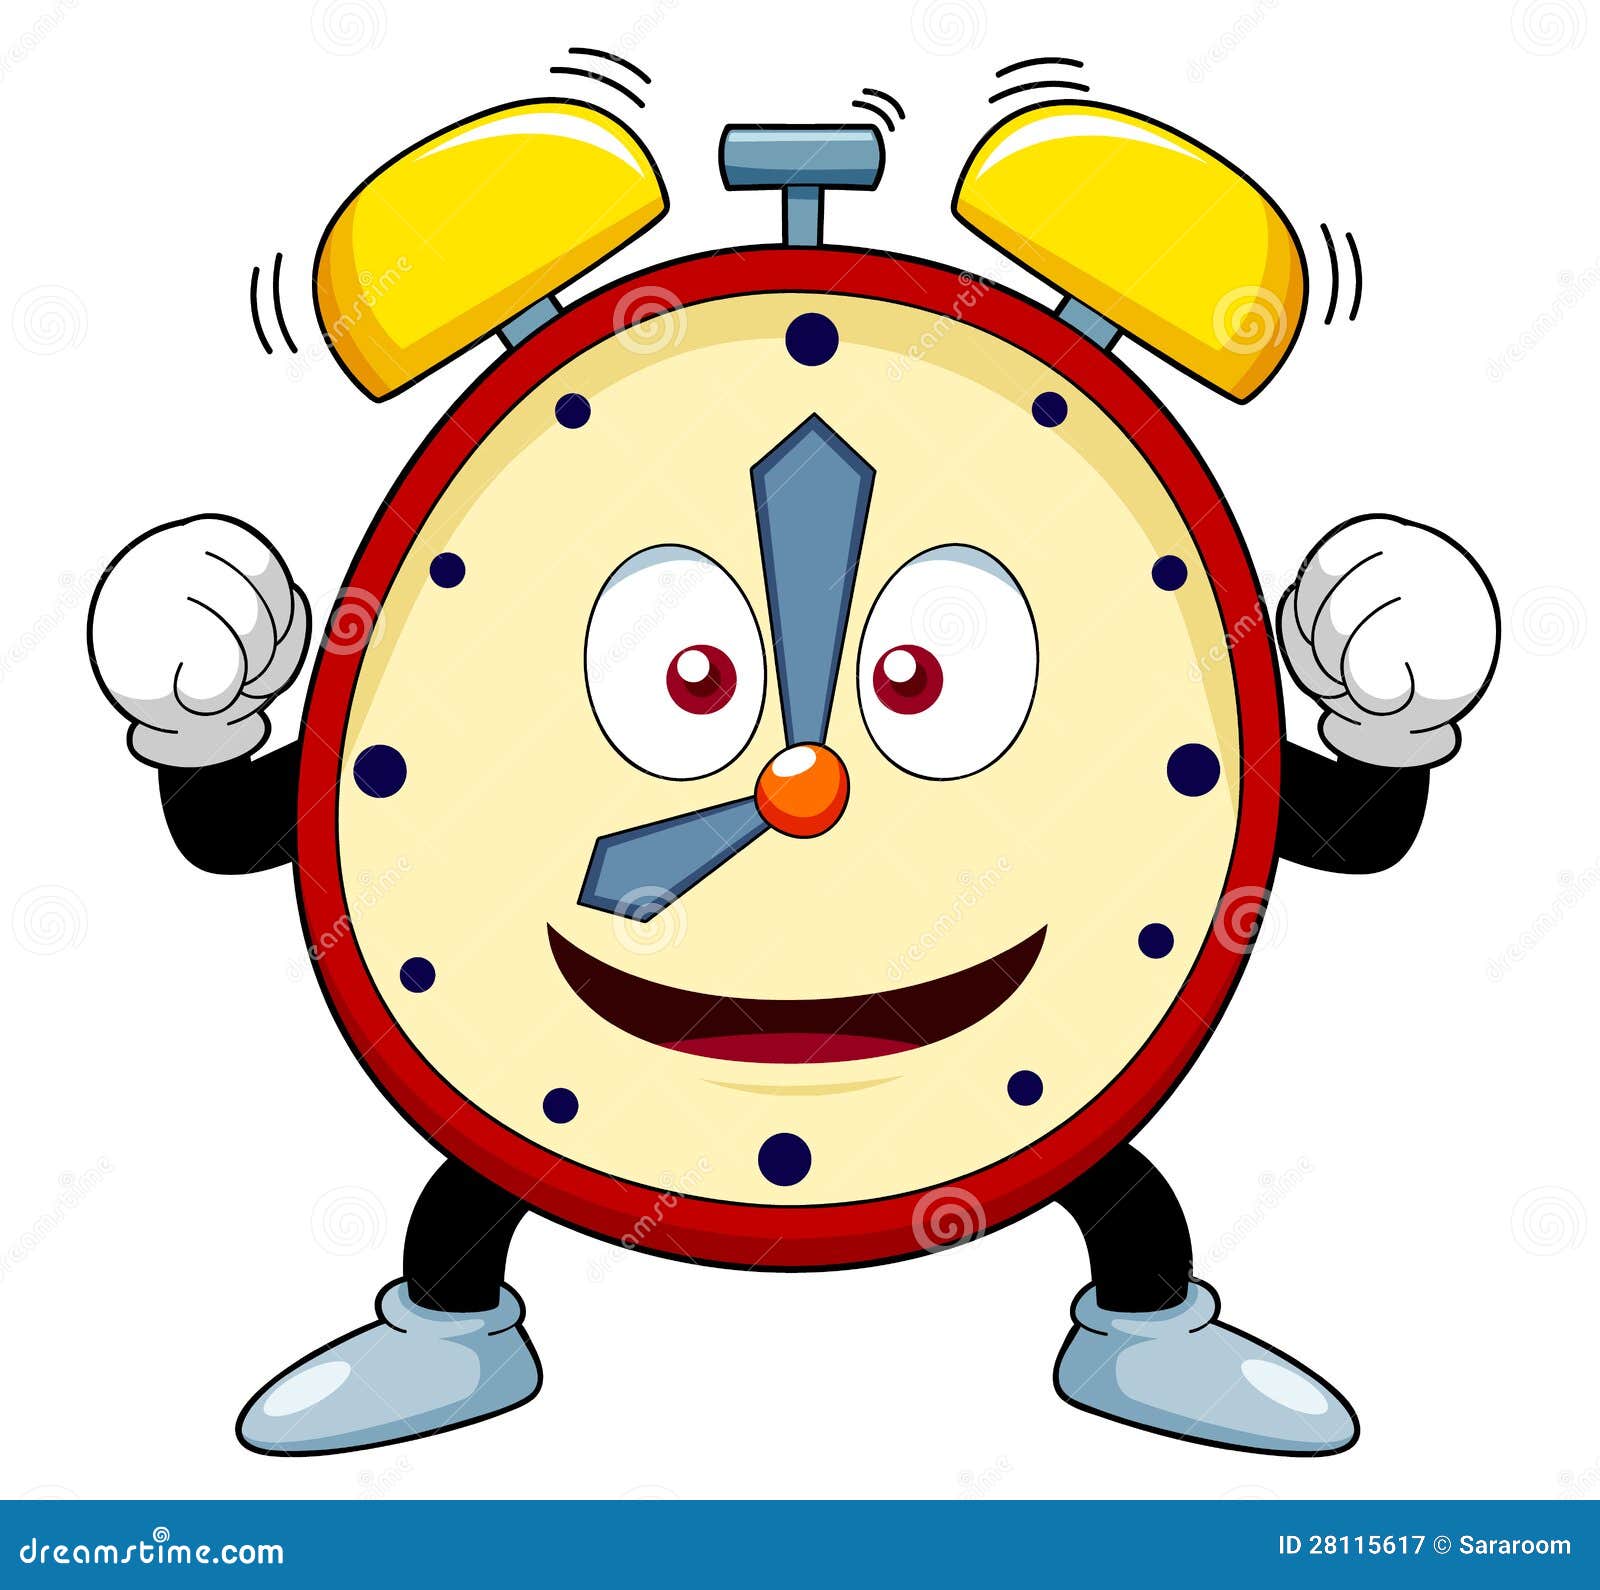 Image result for clock clipart free